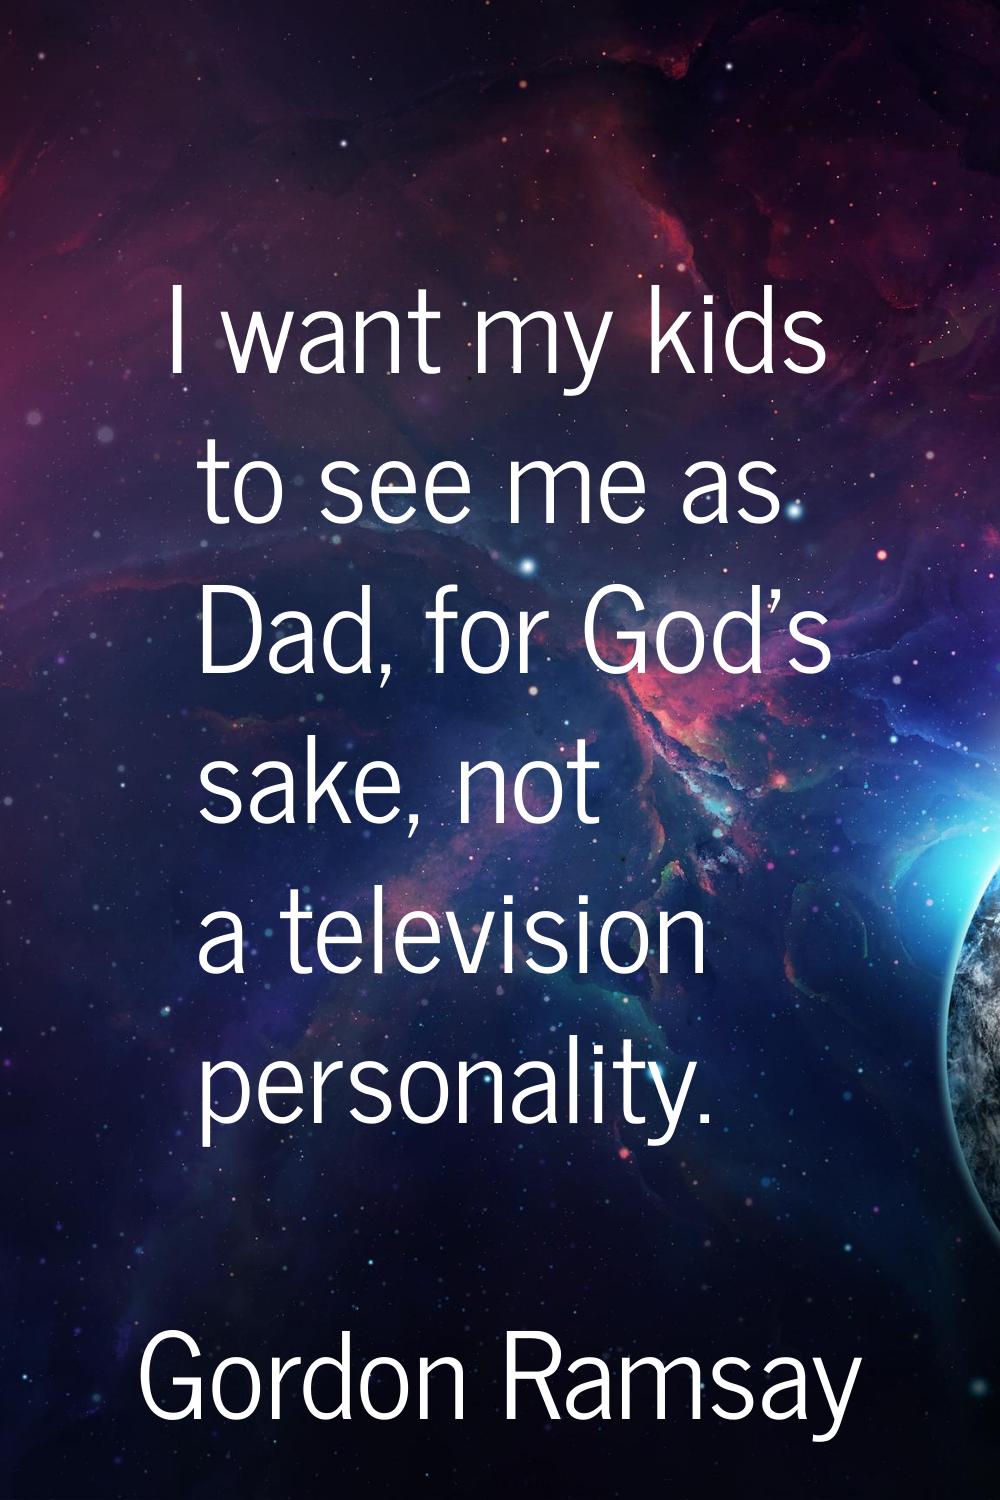 I want my kids to see me as Dad, for God's sake, not a television personality.